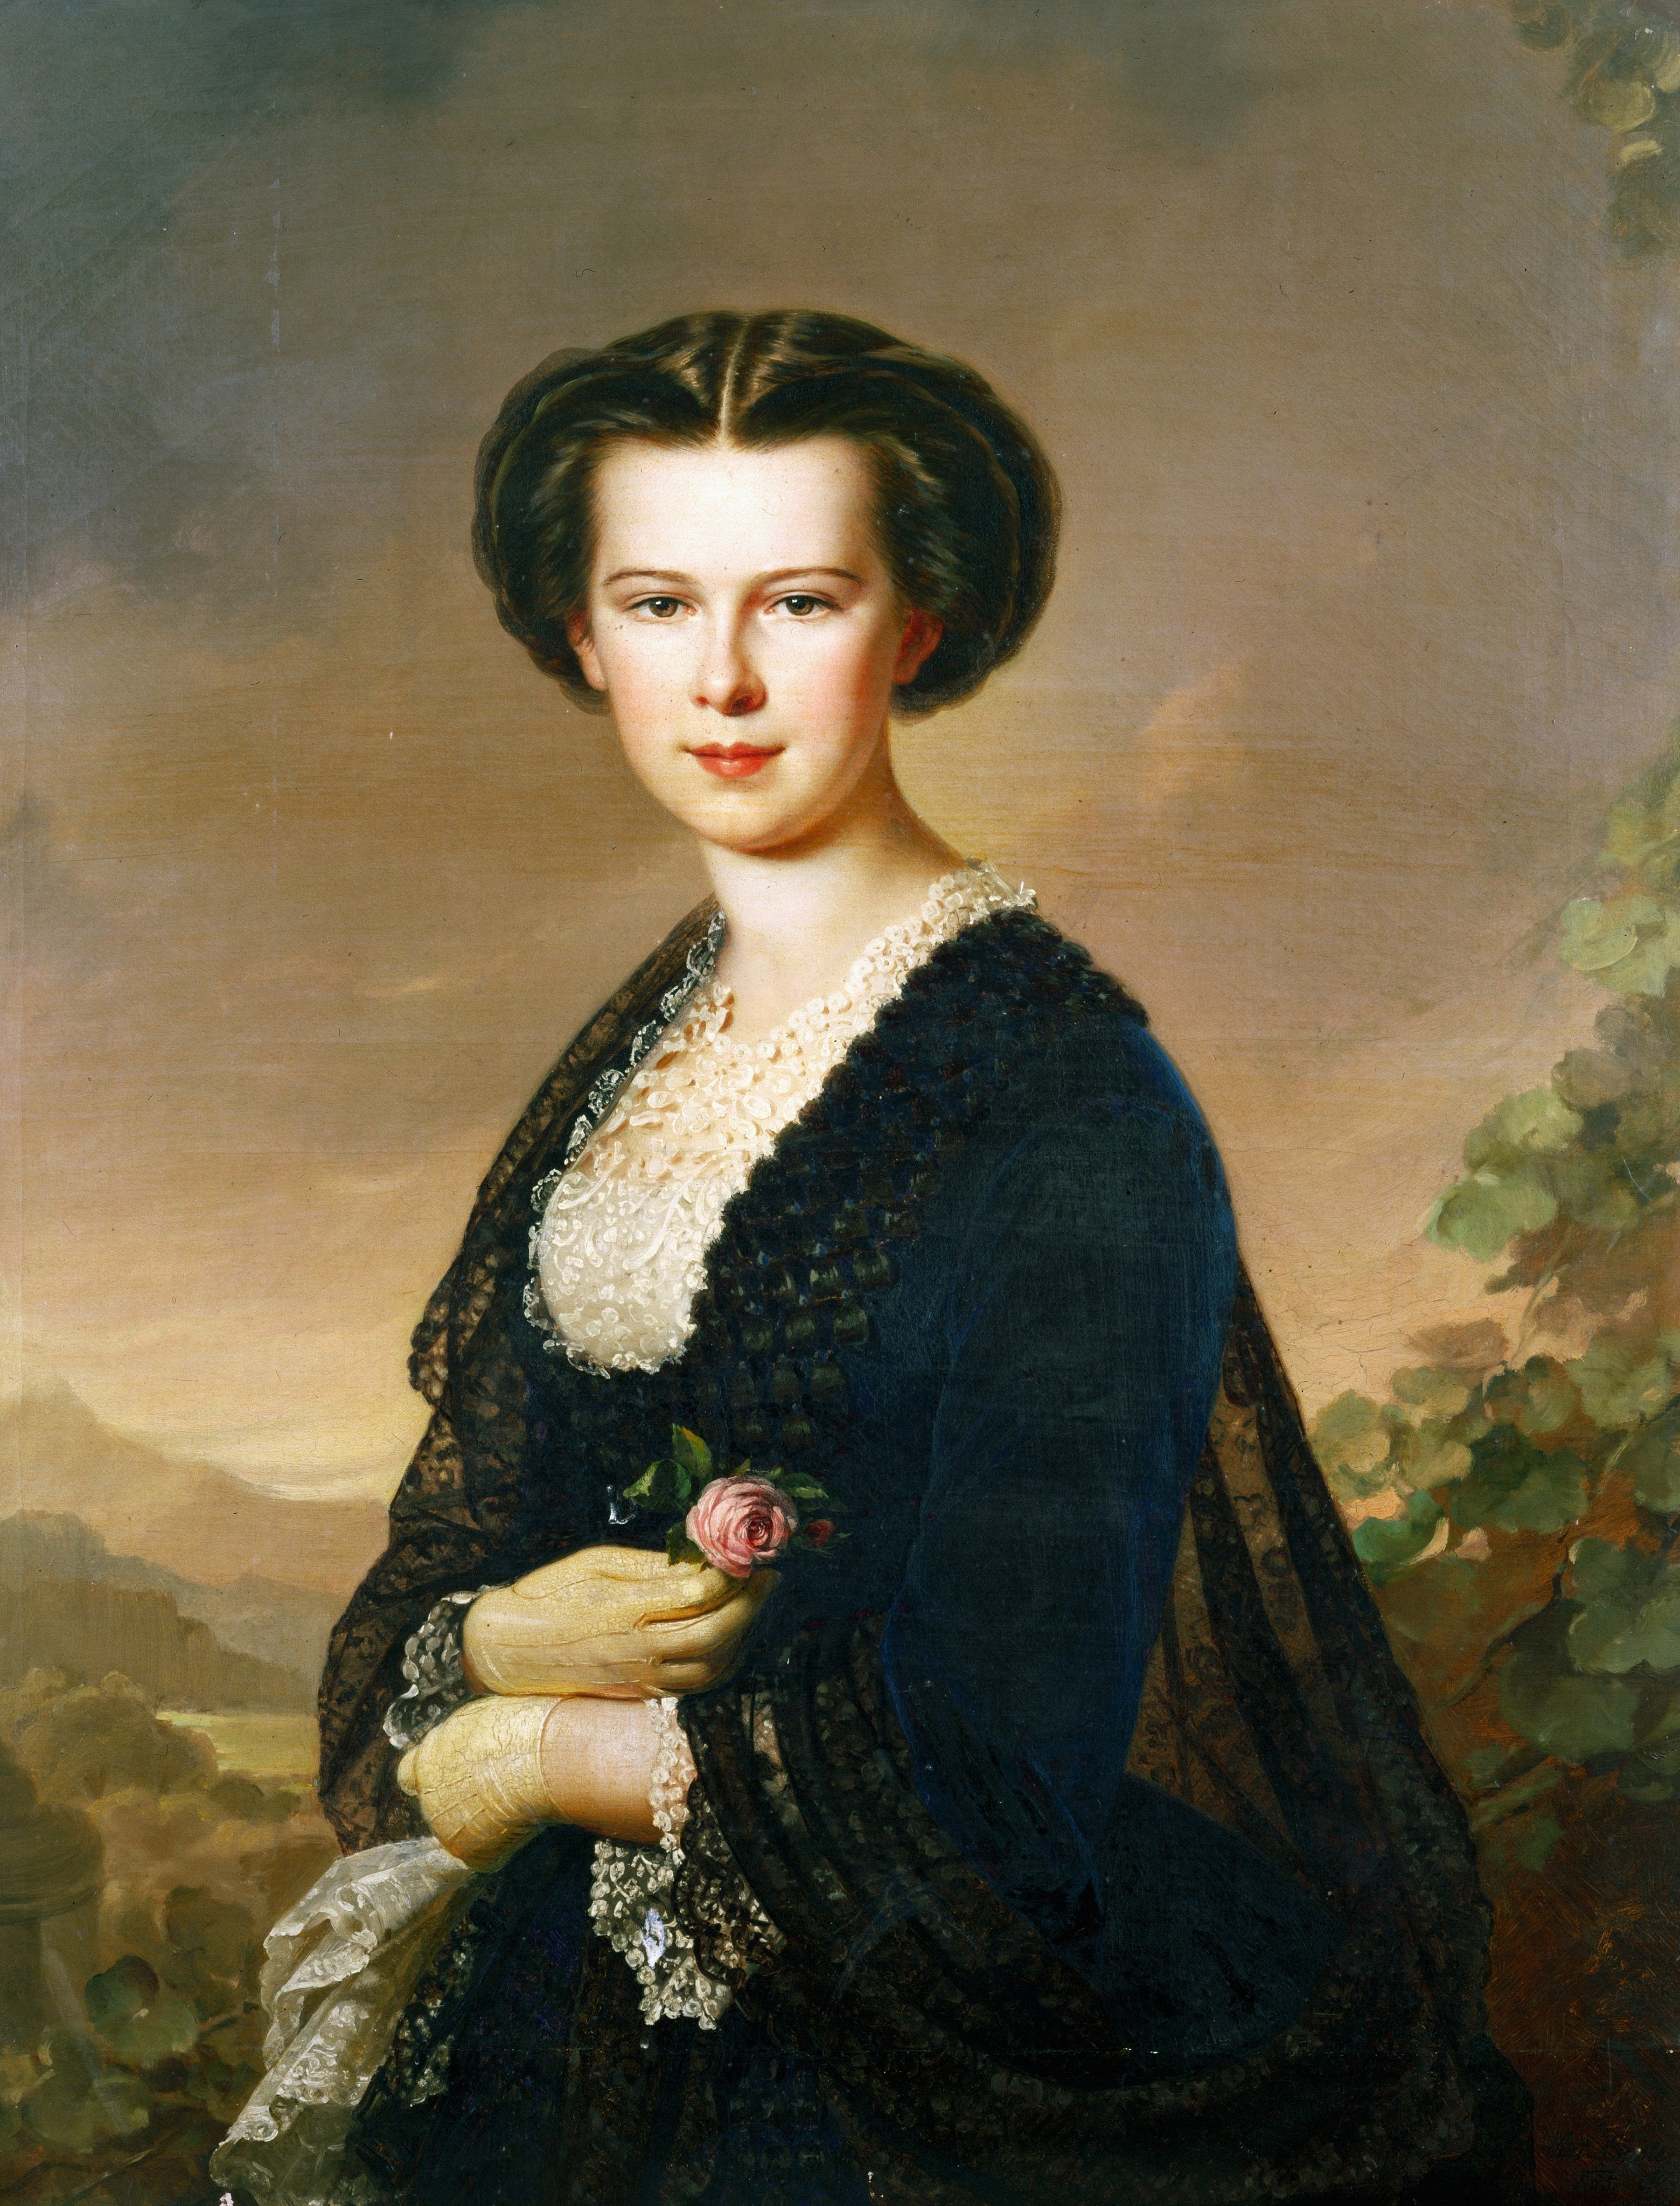 Over 100 years since her death, Empress Elisabeth of Austria is having an unprecedented pop culture moment, thanks to Netflix’s The Empress, biopic Sisi & I and the Oscar-tipped Corsage. Photo: Getty Images